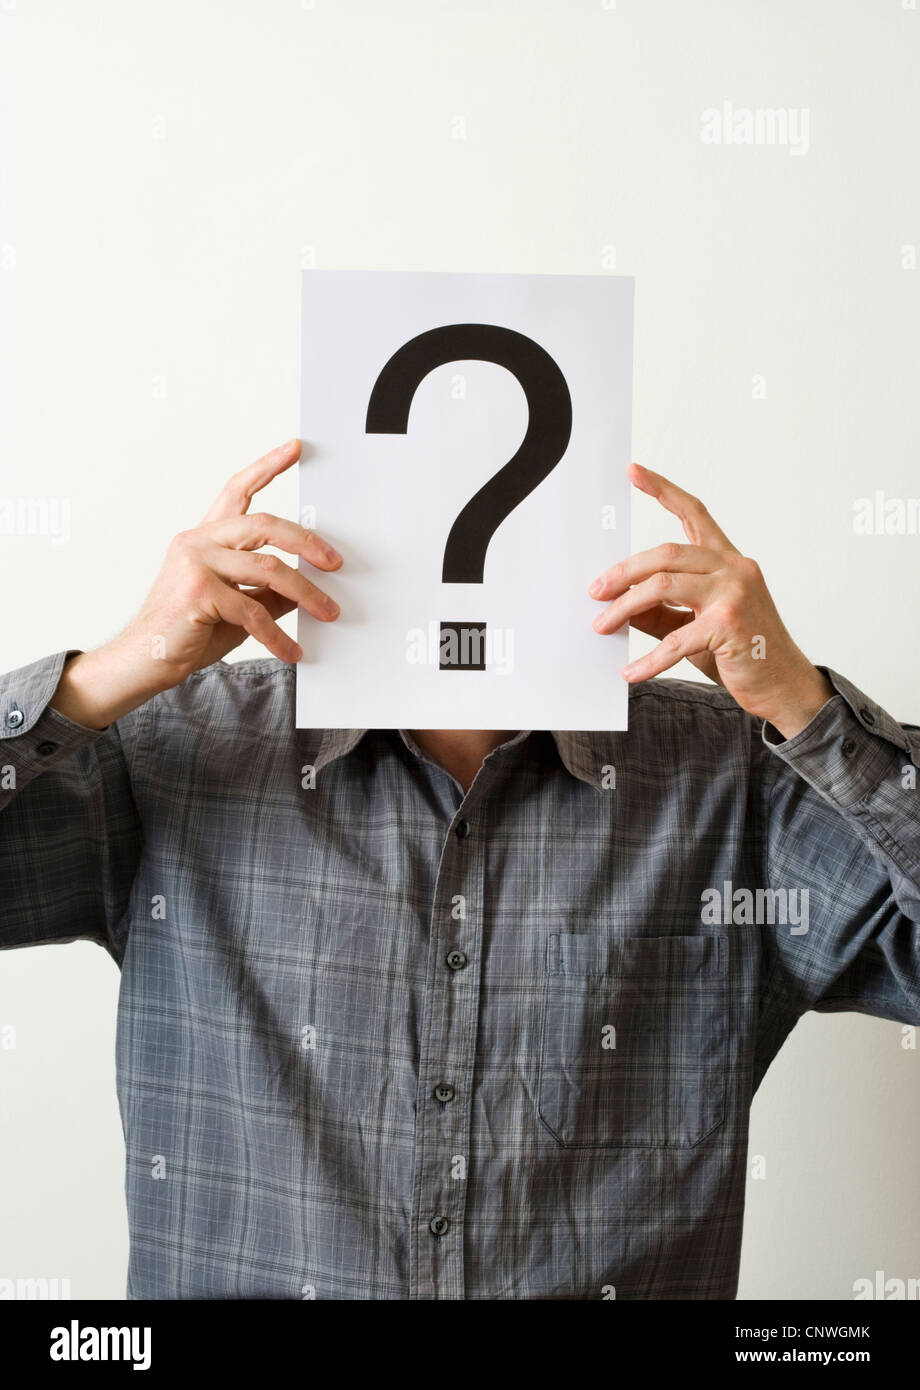 Man with question mark covering face. Stock Photo